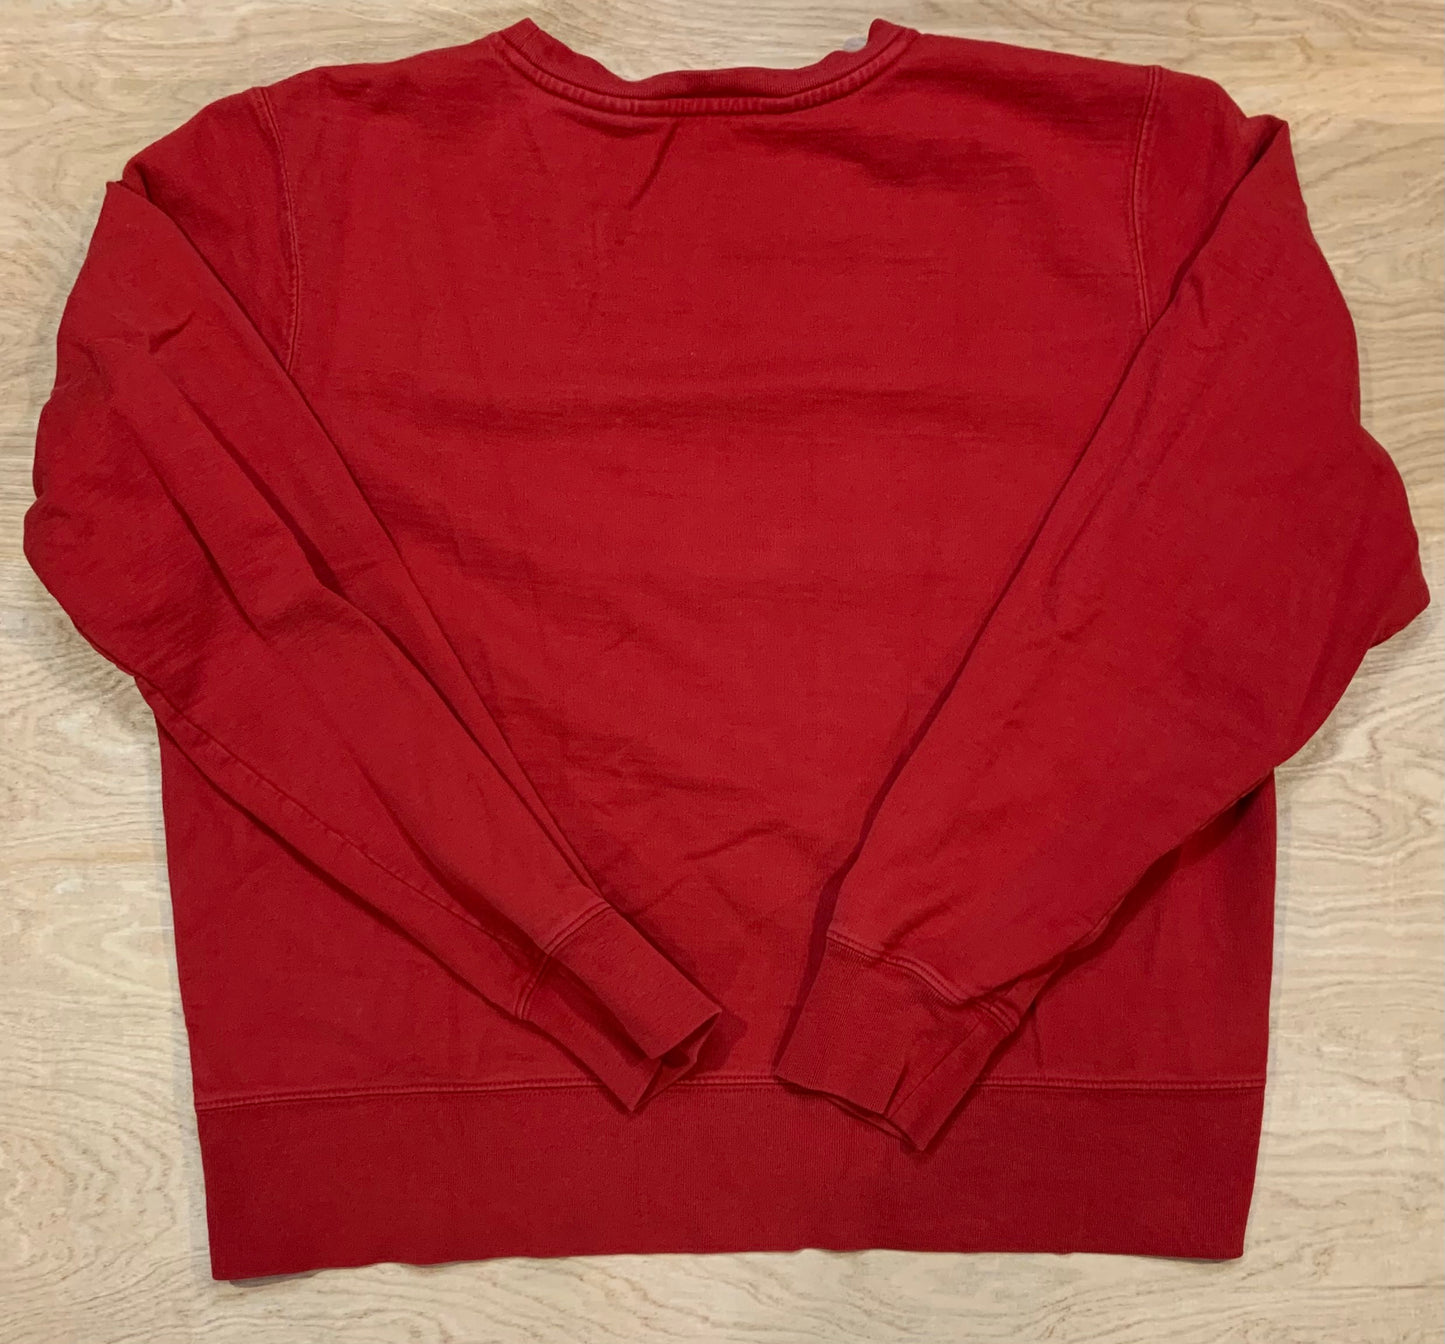 Classic "Tommy Hilfiger" Red Crewneck